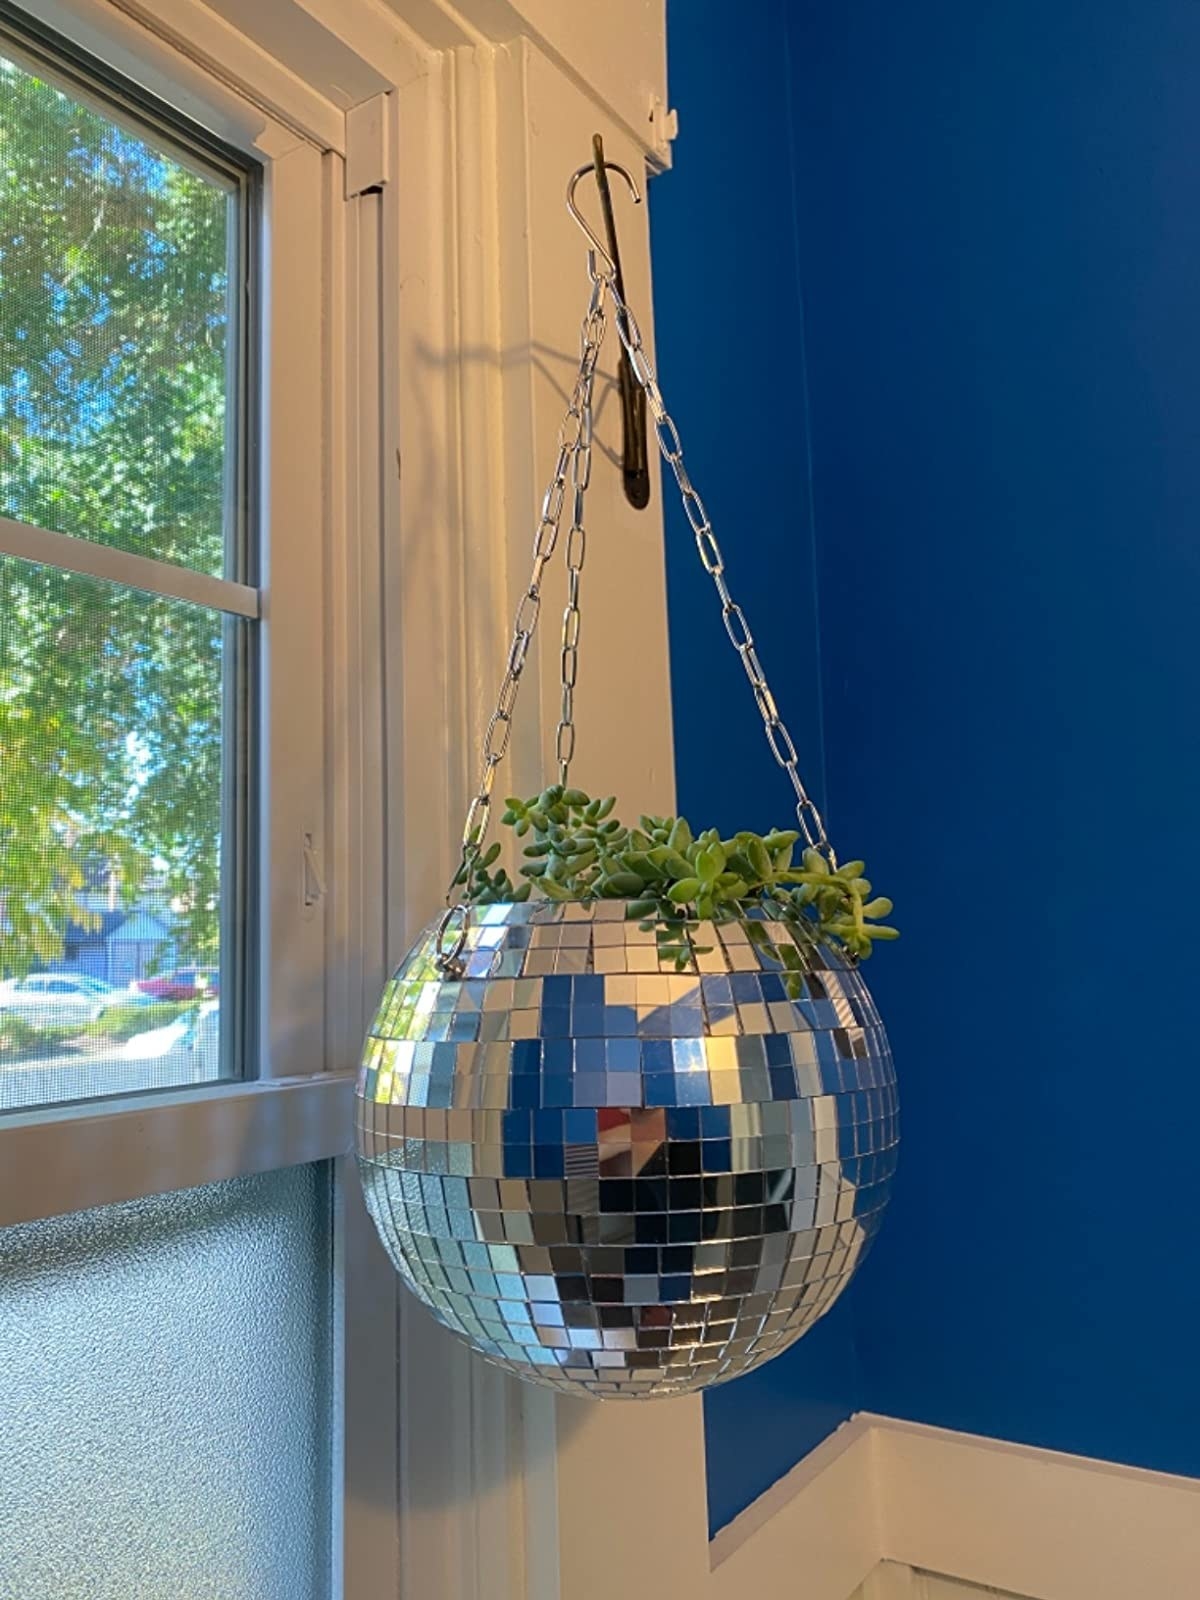 Hanging silver disco ball planter with plant inside